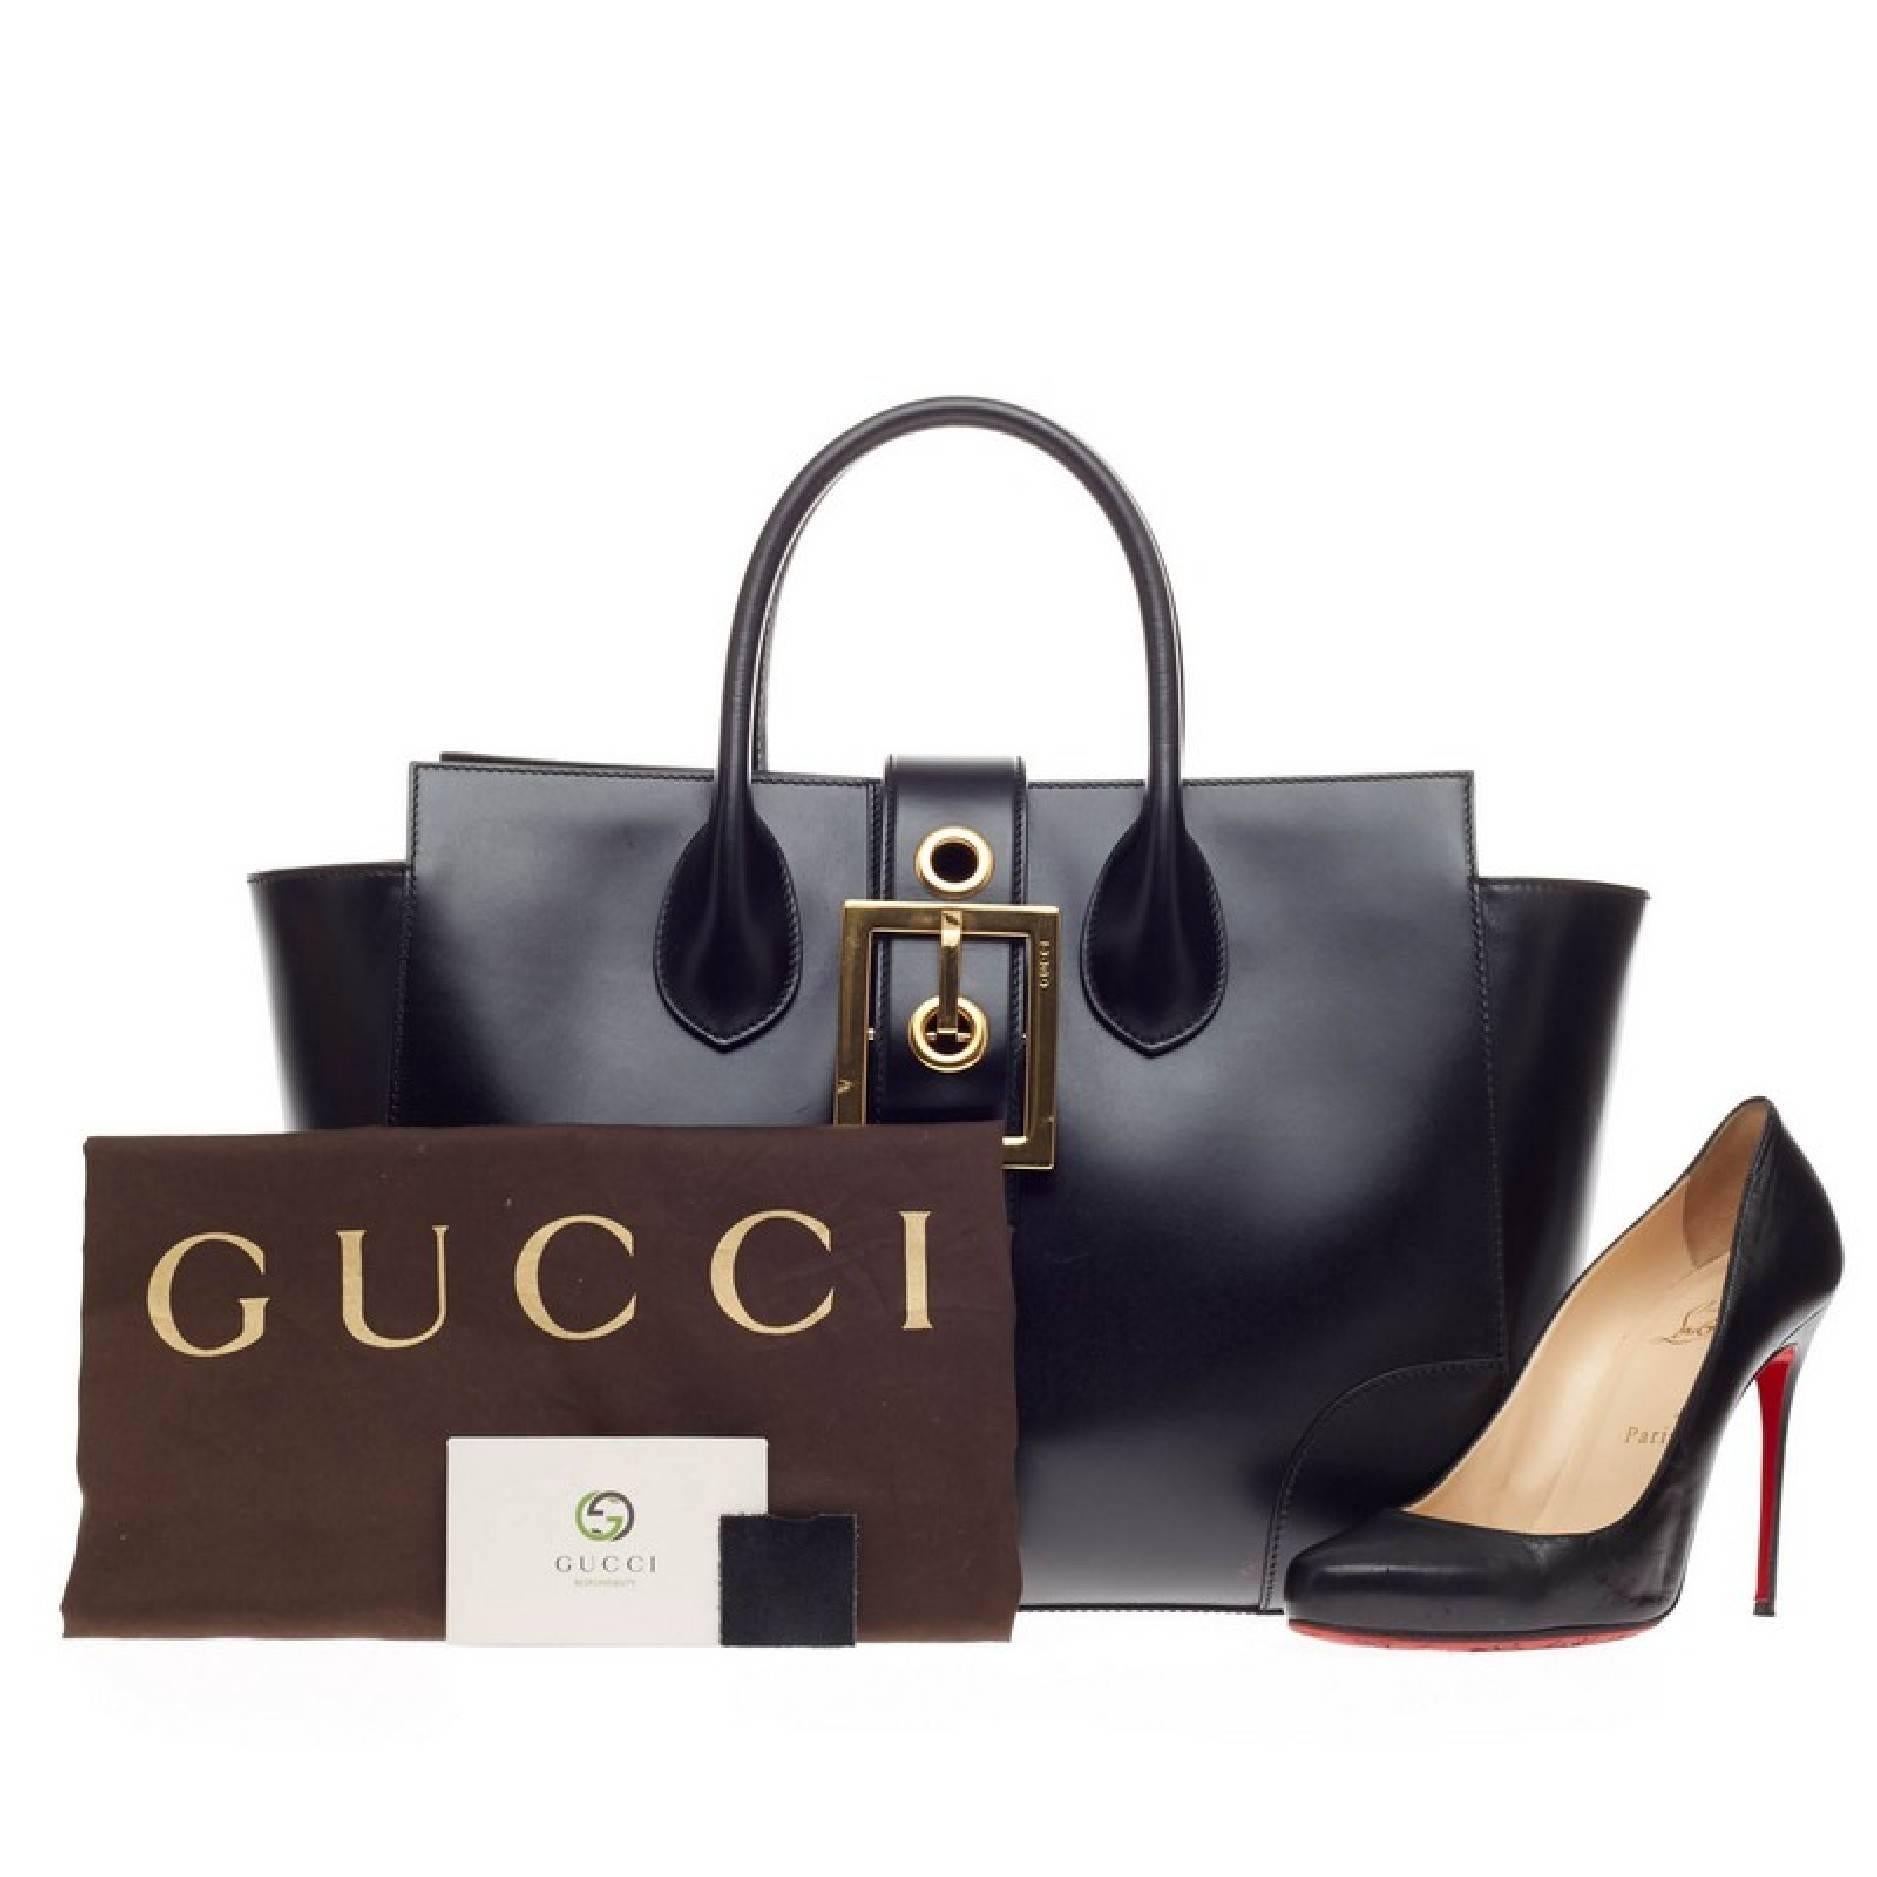 This authentic Gucci Lady Buckle Top Handle Leather is sleek and functional made for your everyday look. Crafted in smooth black calfskin leather, this structured tote features an oversized top flap buckle belt detail with engraved Gucci logo,